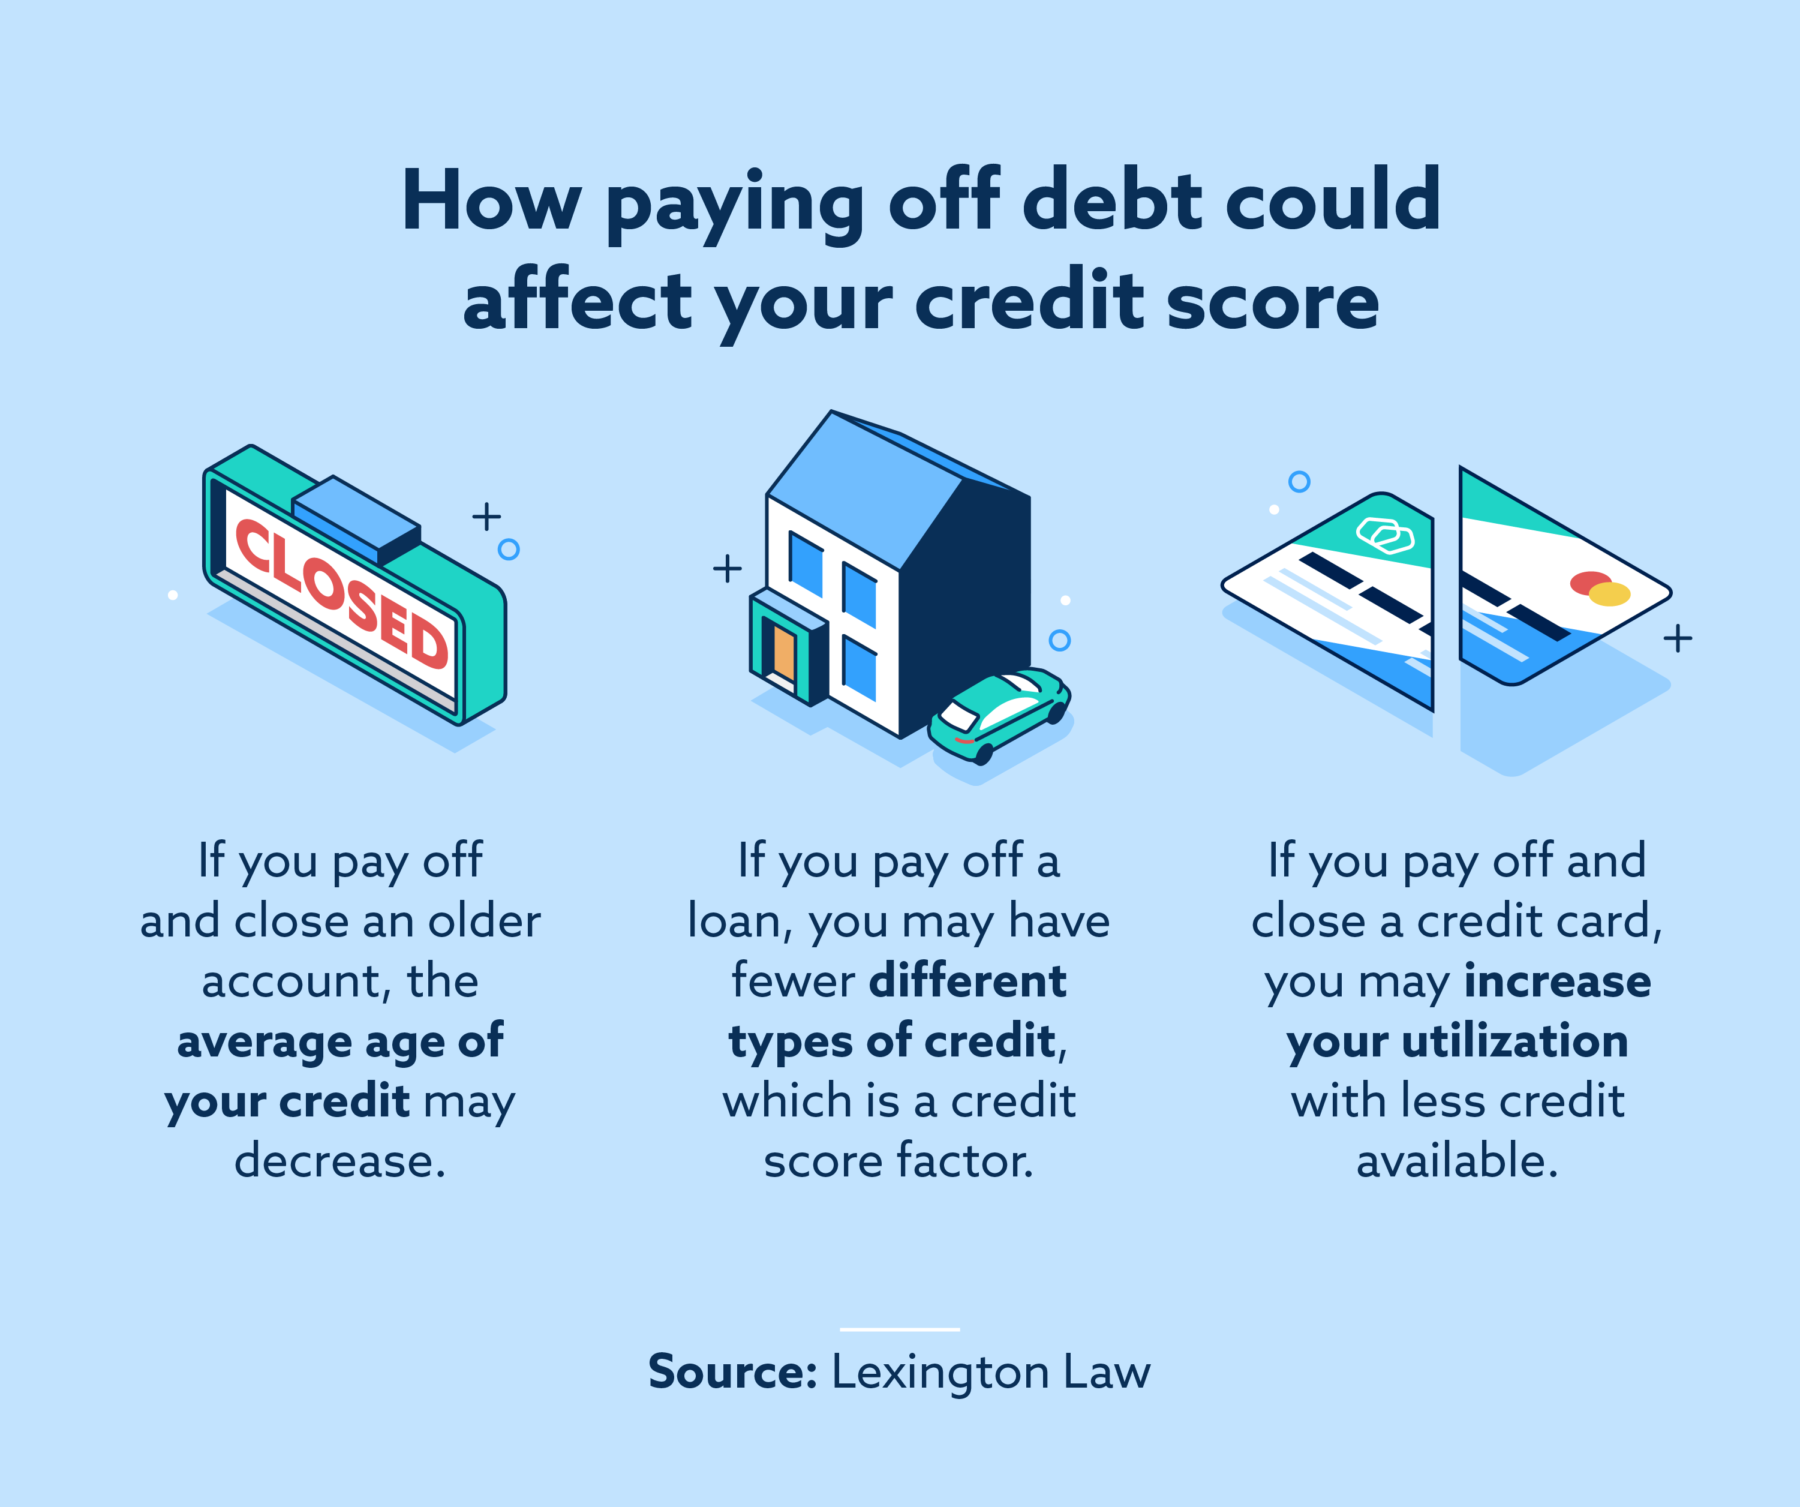 How paying off debt could affect your credit score